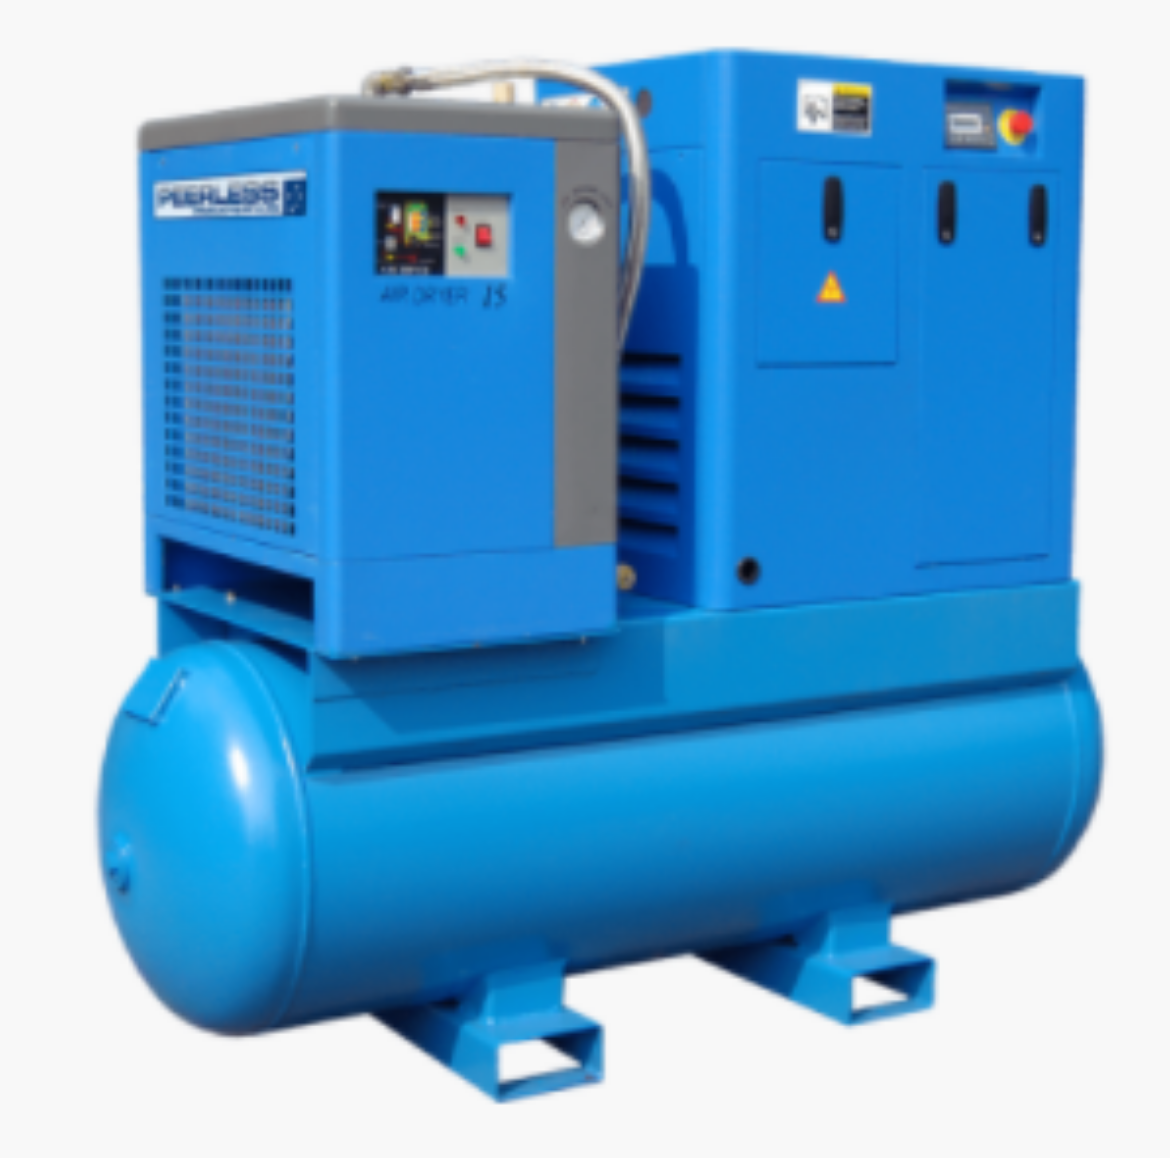 Picture of PEERLESS 10HP ROTARY SCREW COMPRESSOR 8 BAR 1200LPM C/W DRYER TANK AND ROTARY SCREW